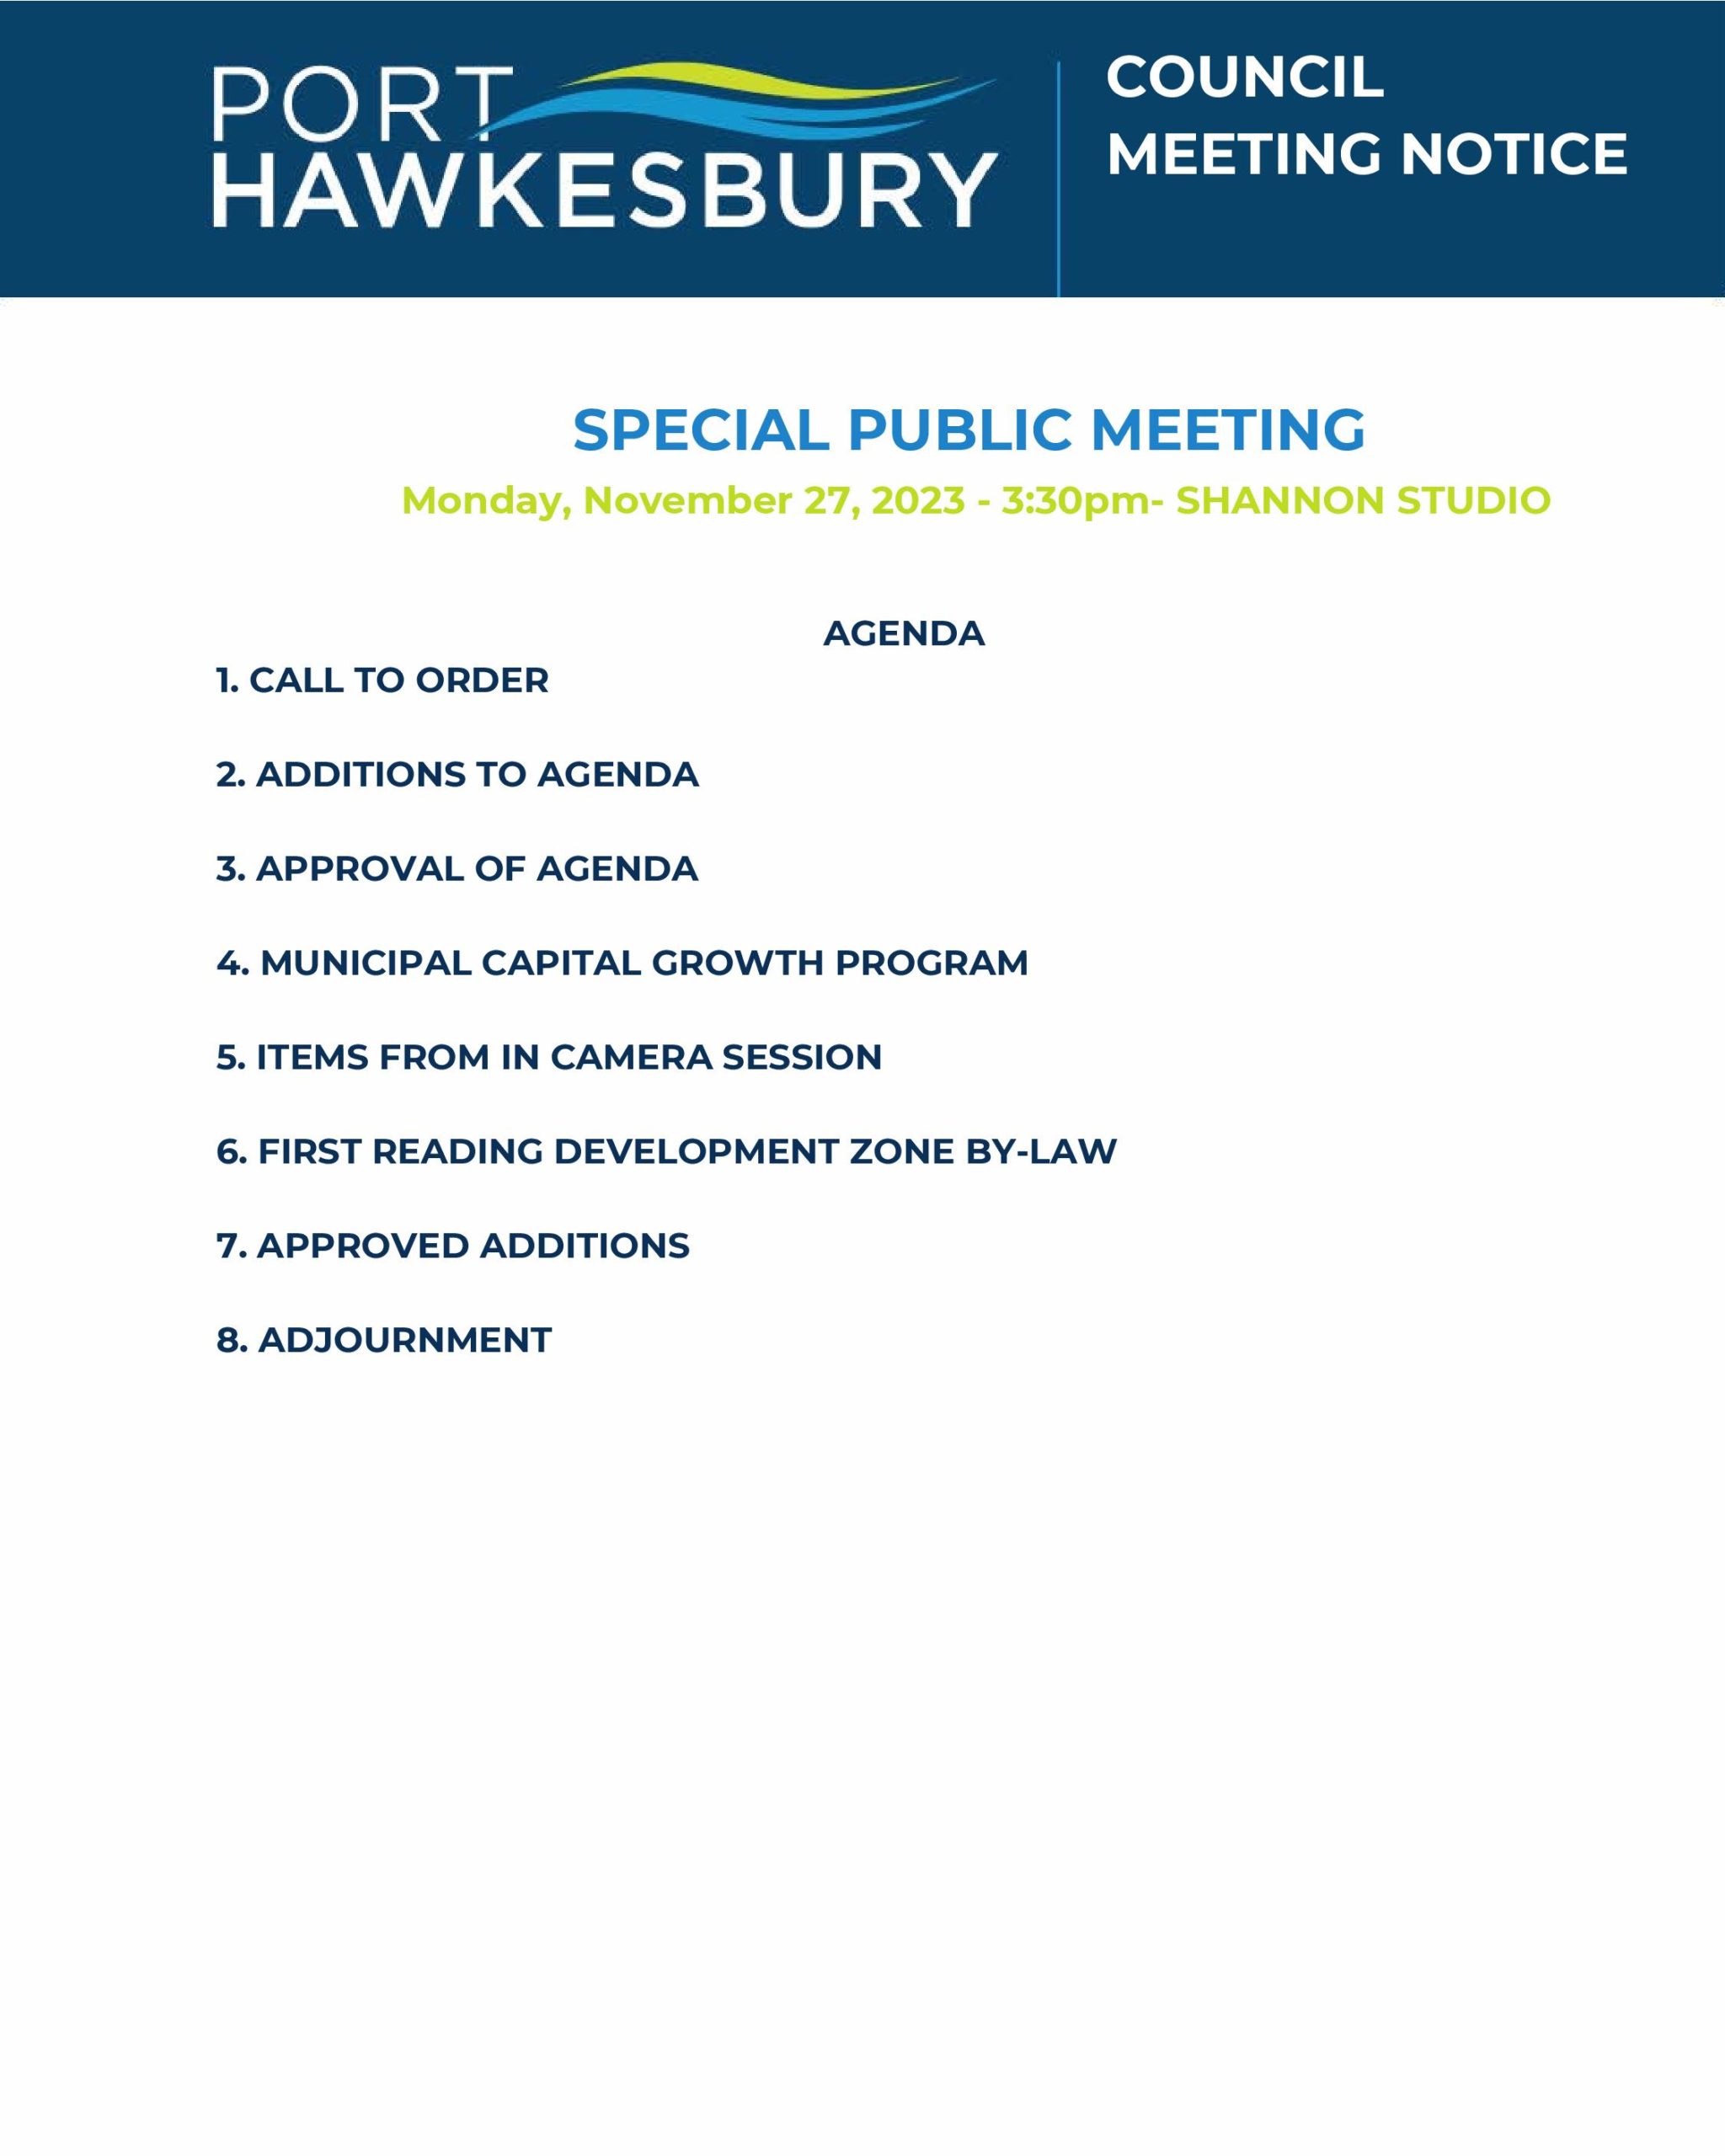 Special Public Meeting of Council